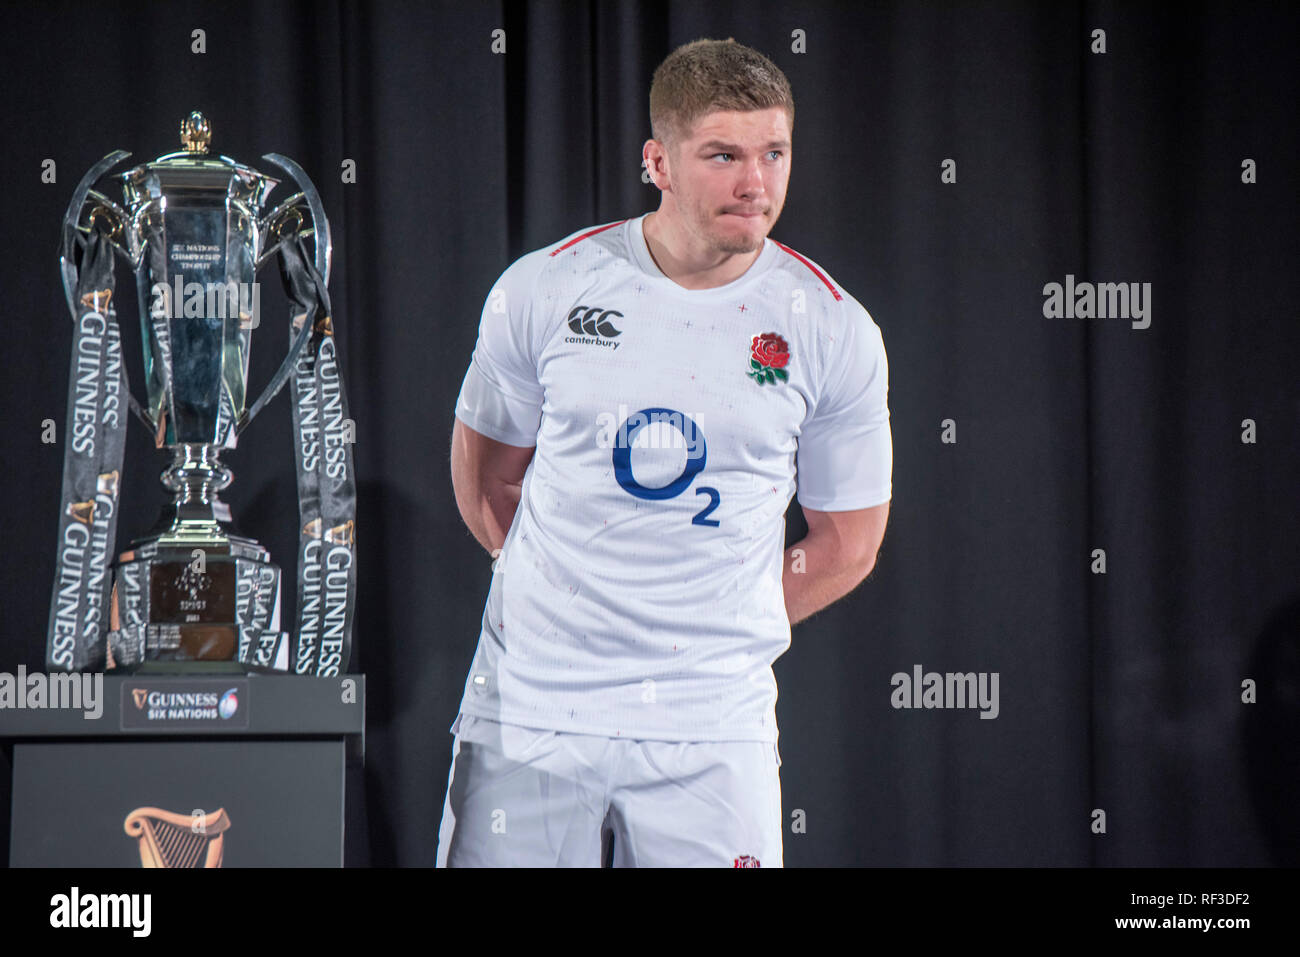 Swansea, UK. 23rd Jan, 2019. Guinness Six Nations Rugby Tournament launch at the Hurlingham Club in London - 23rd January 2019 England Rugby Captain Owen Farrell alongside the Six Nations trophy. Credit: Phil Rees/Alamy Live News Stock Photo